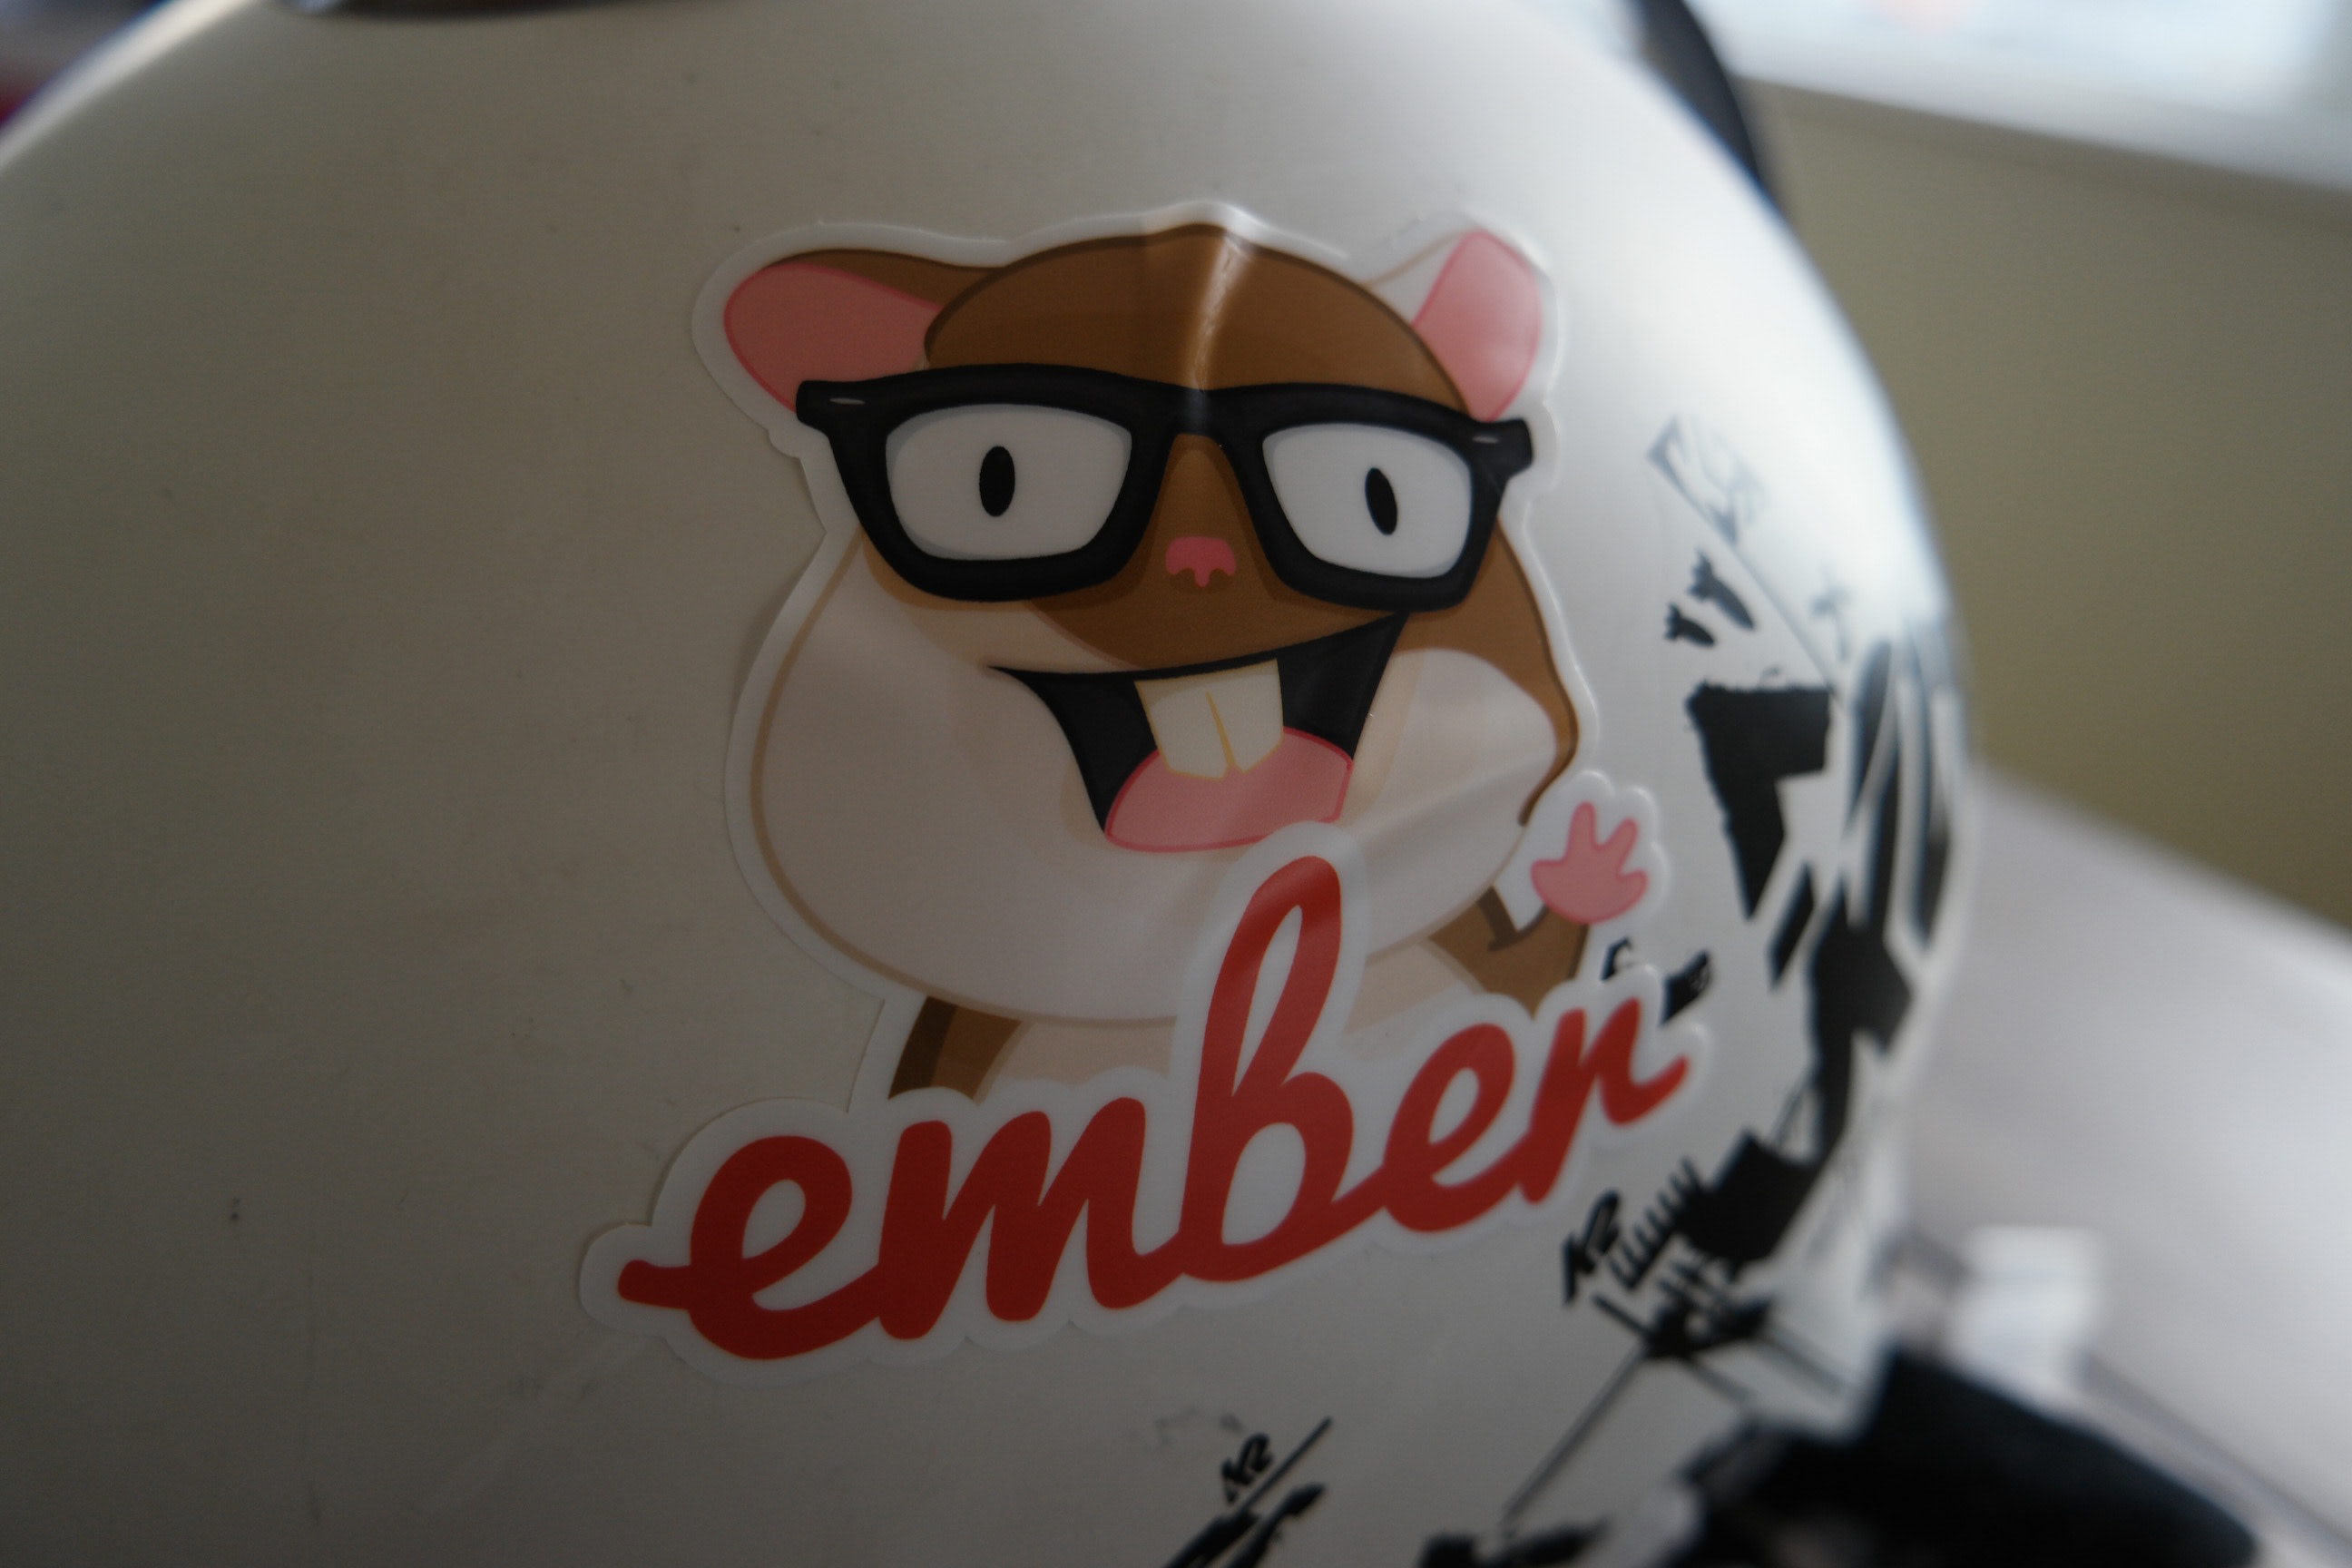 Helmet stickers on curved surface